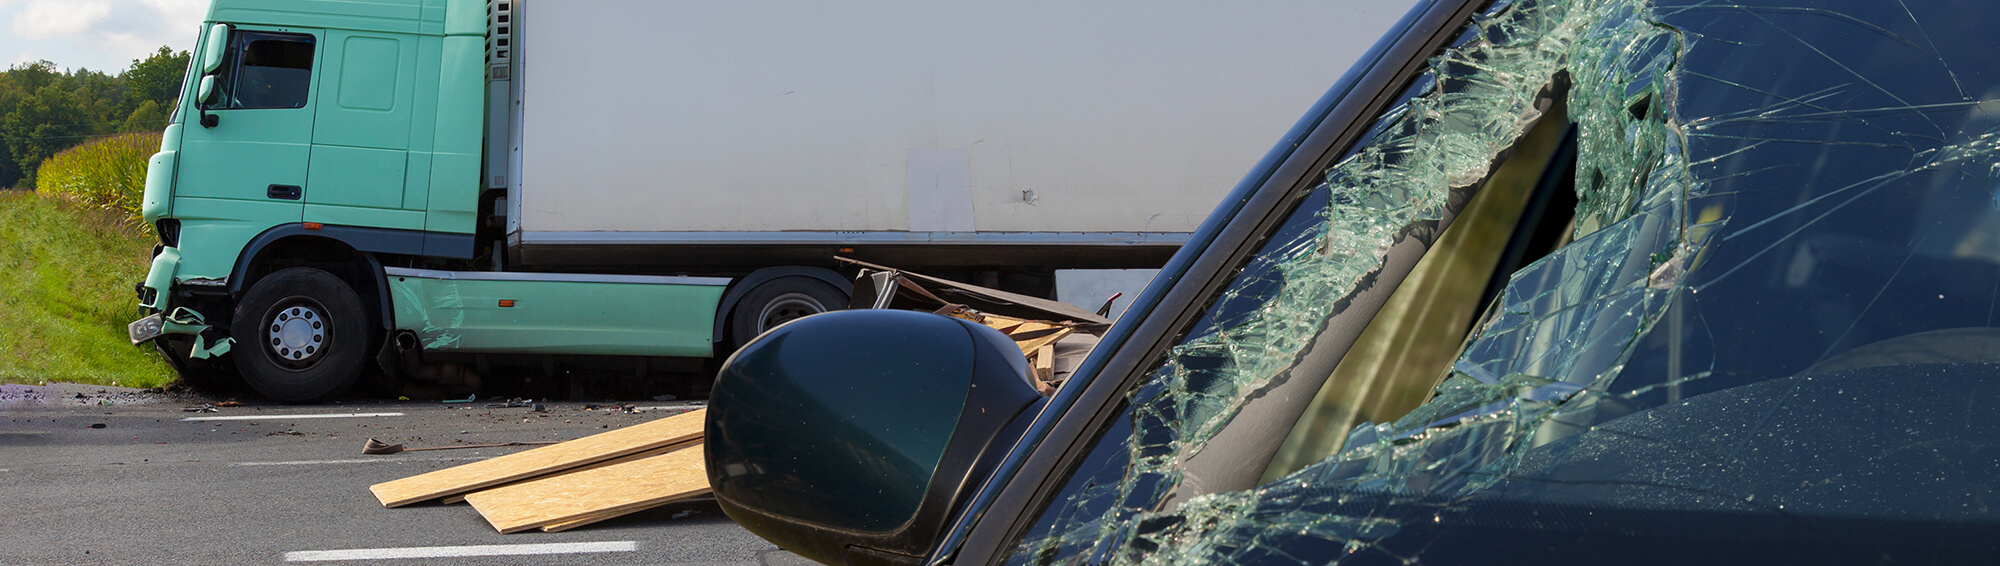 Getting Compensation After a Truck Accident Can Be Difficult Without a Lawyer